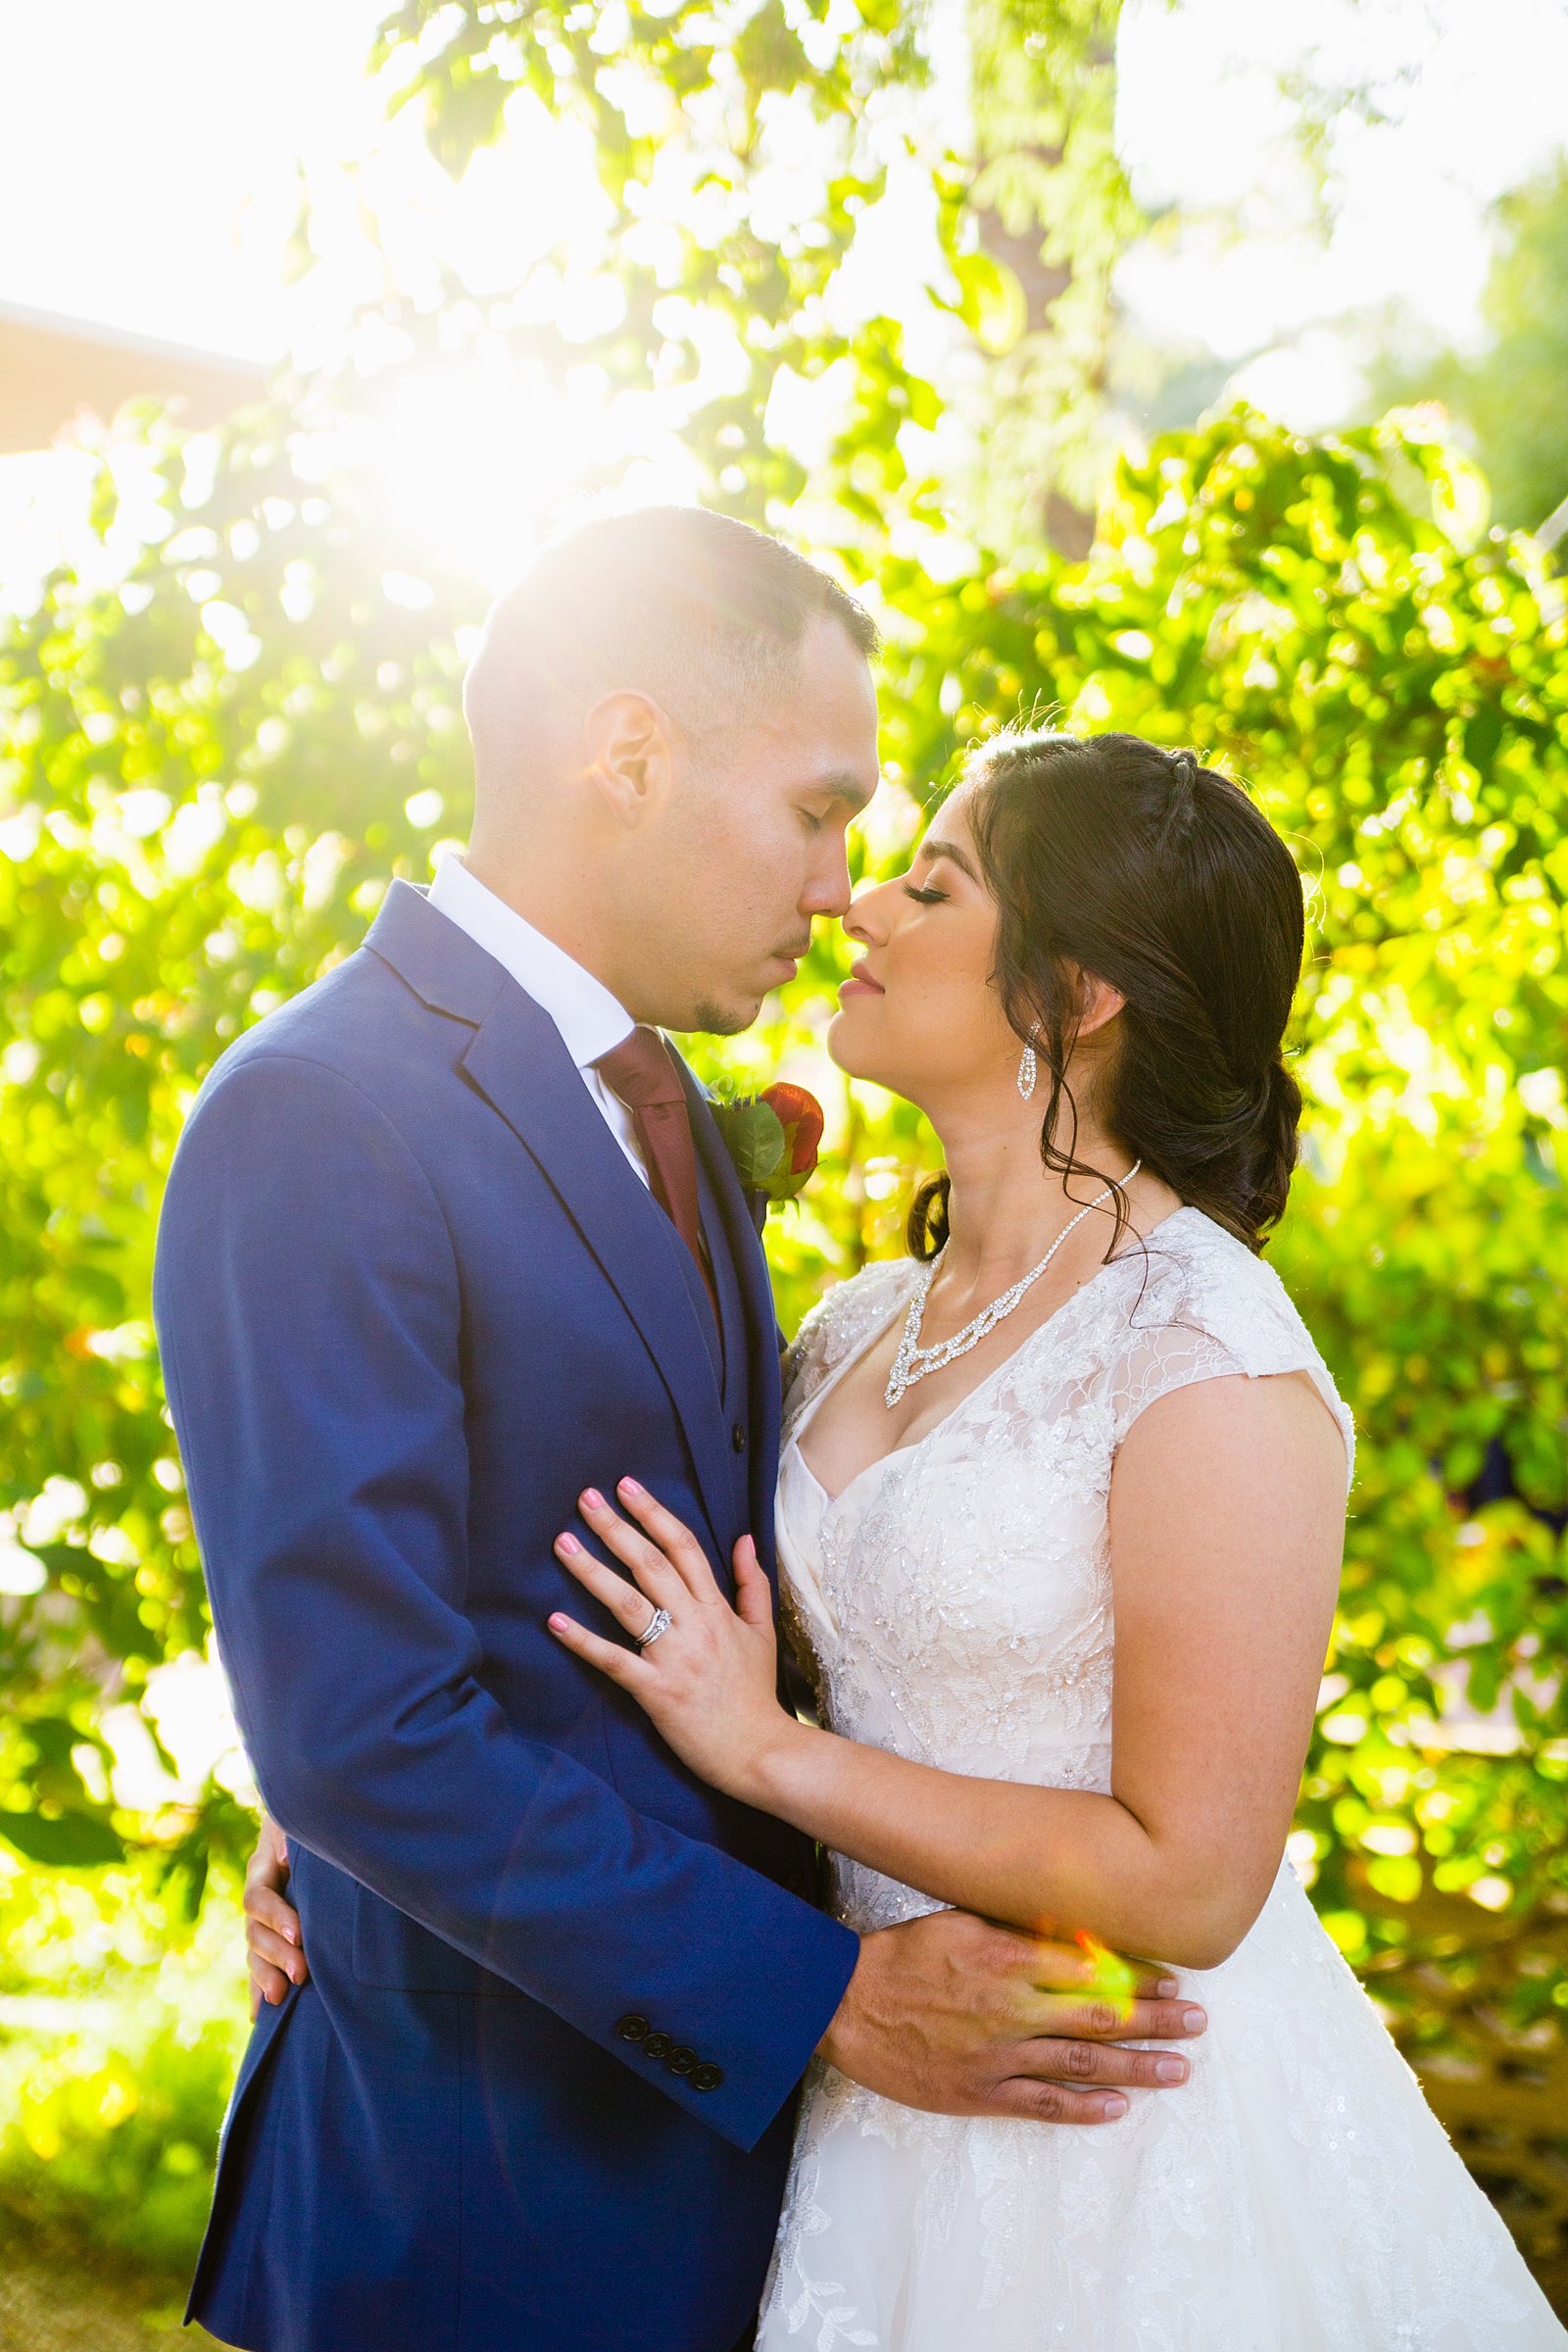 Bride and Groom share an intimate moment at their Valley Garden Center wedding by Arizona wedding photographer PMA Photography.